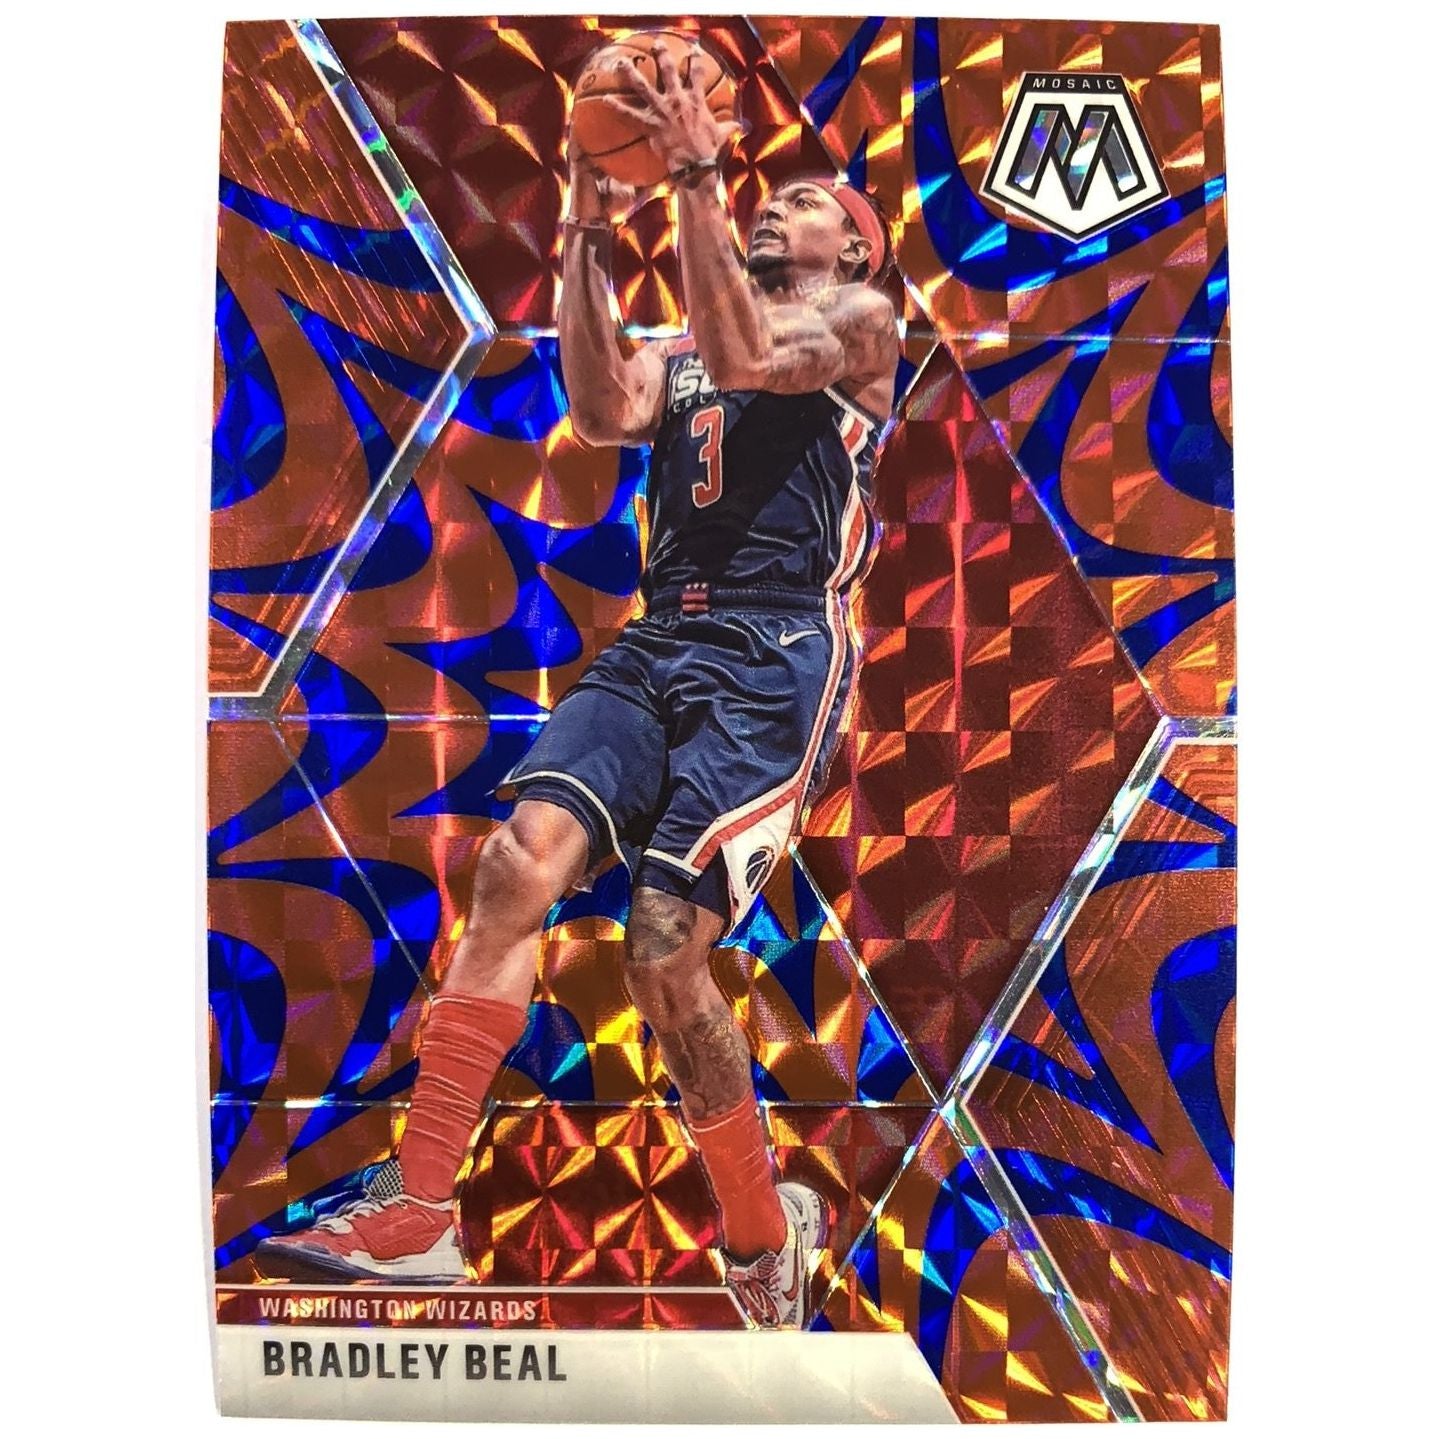  2019-20 Mosaic Bradley Beal Blue Prizm  Local Legends Cards & Collectibles